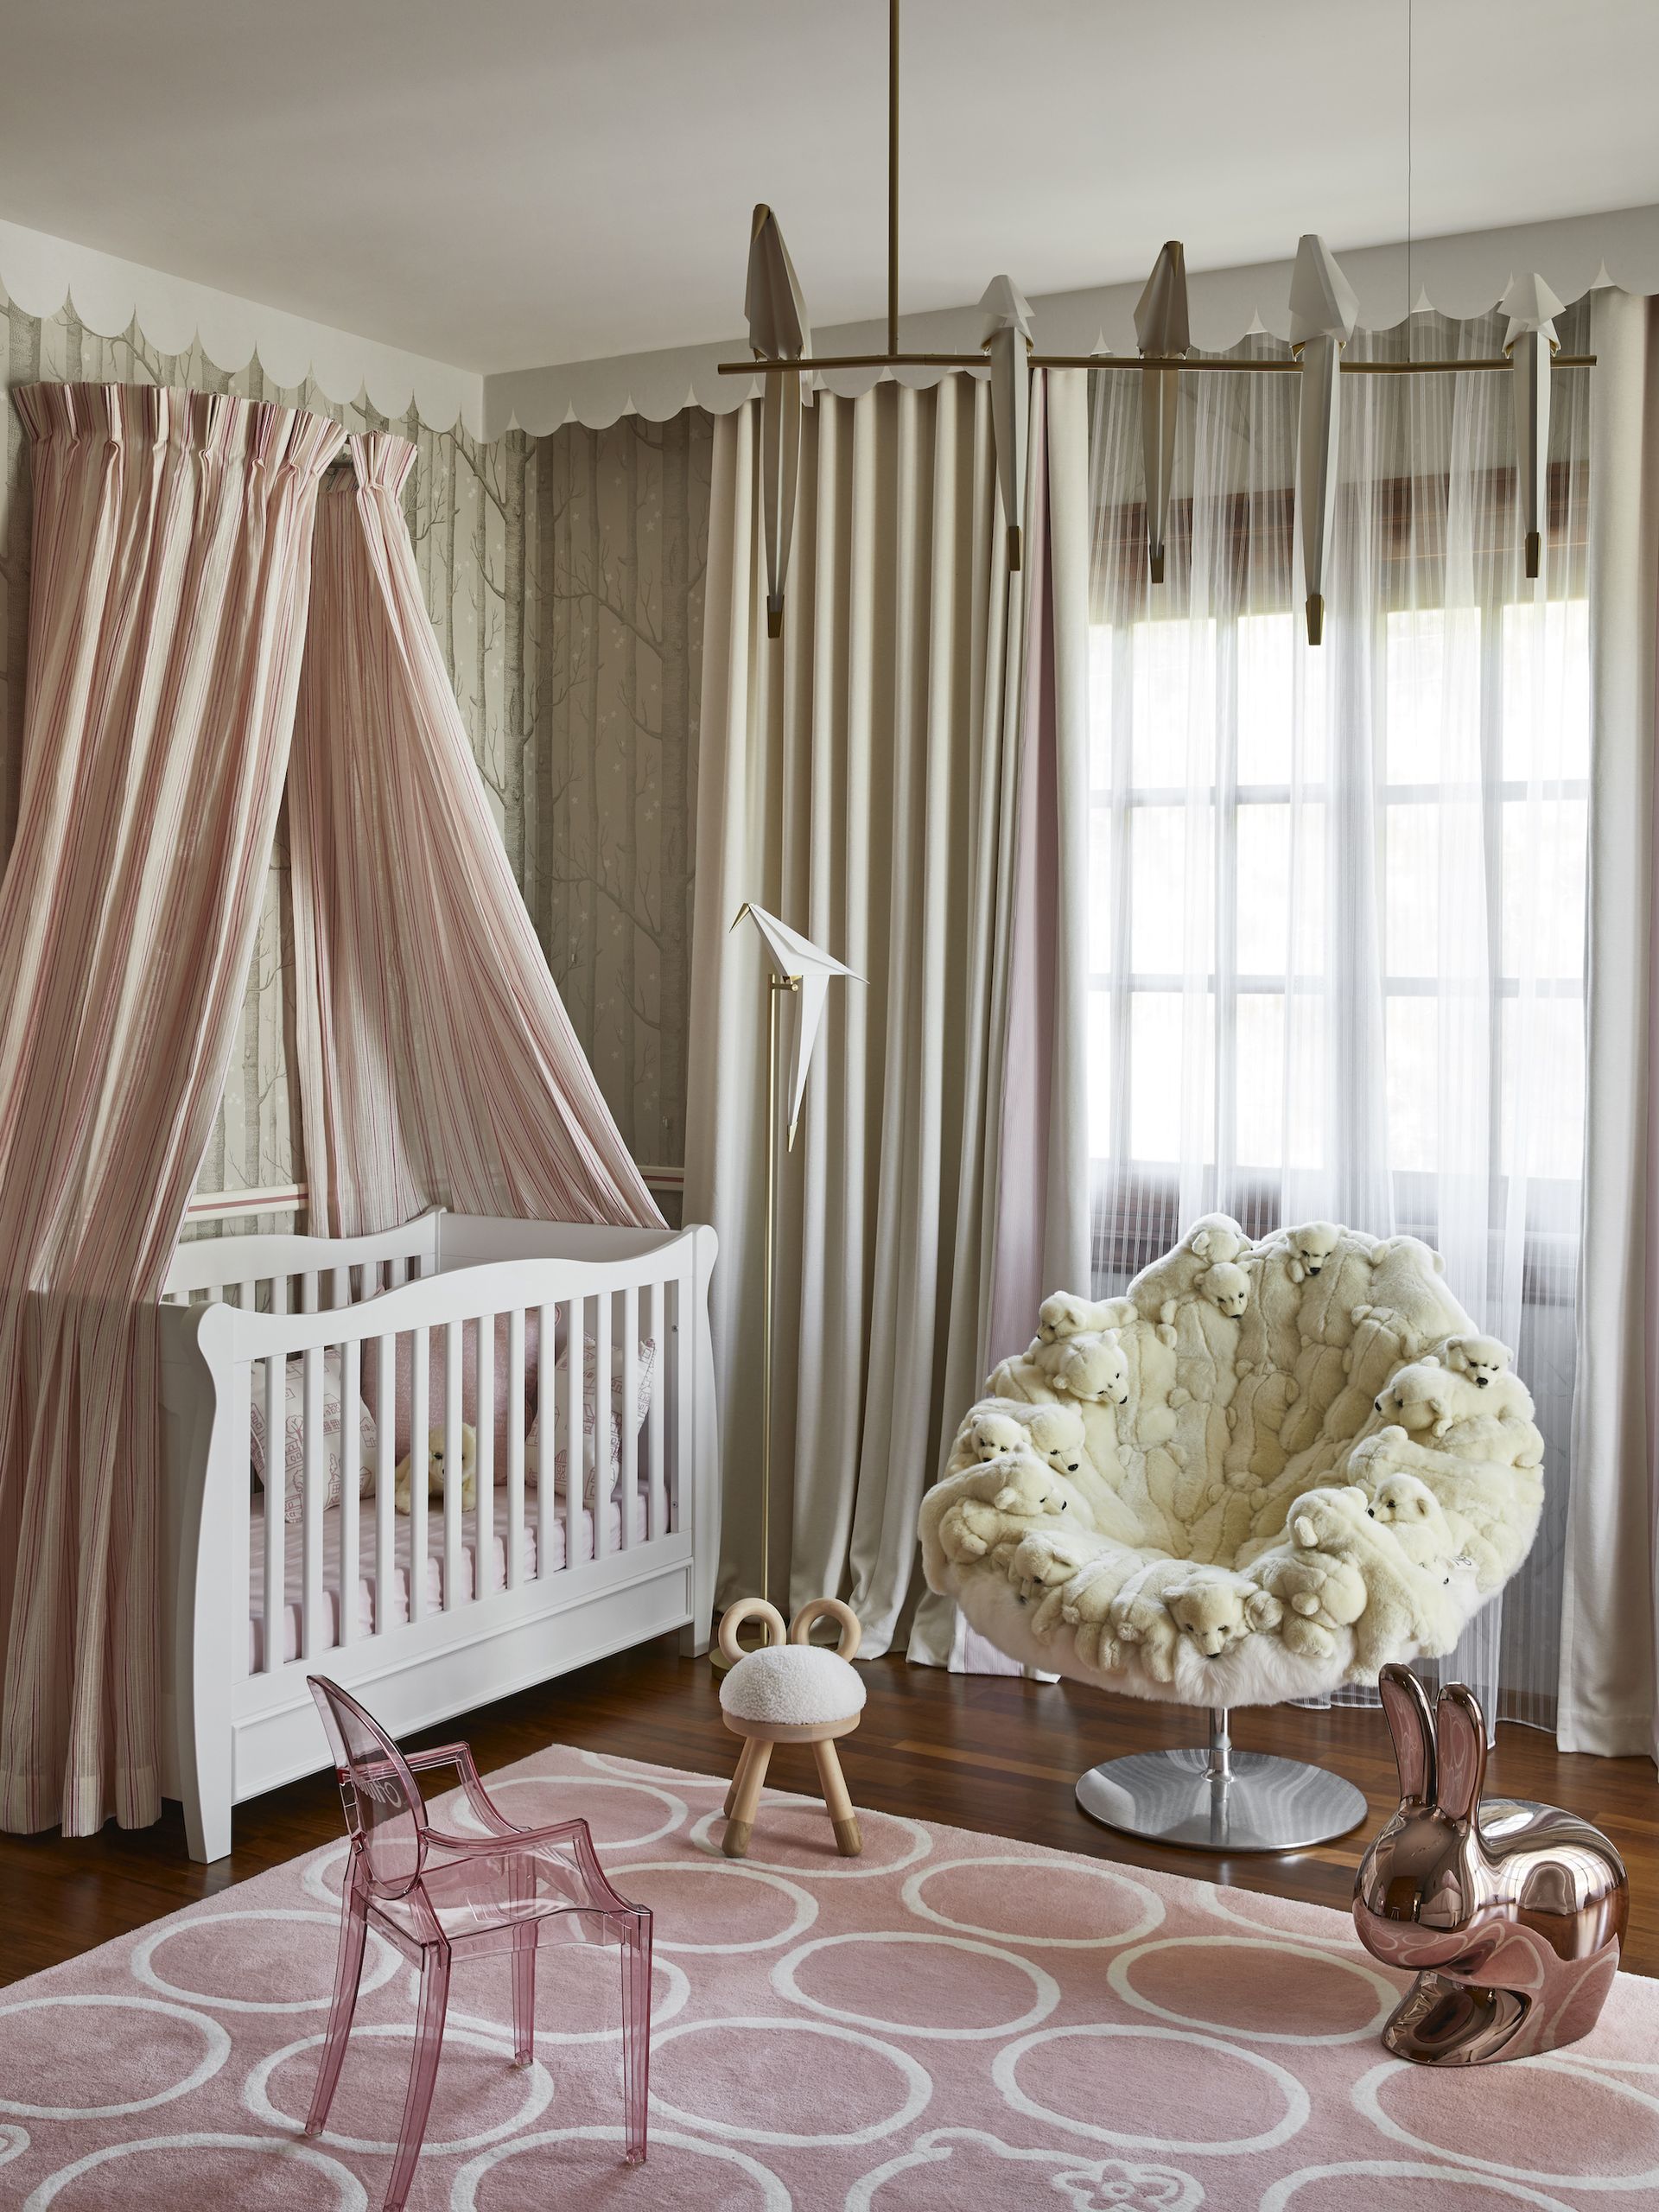 <p>                     'For this project, I specifically focused on the children’s rooms where I customized and adapted every element and detail to suit both the boy and girl,' says Stèphanie Coutas, interior designer and founder of Stèphanie Coutas. 'The bedroom is a separate universe that belongs to the child; creating a dreamlike and adaptable space where the imagination has room to grow is really important.'                   </p>                                      <p>                     'For both the children’s rooms we used pastel colors to create a fun and gentle atmosphere. Rather than carpets, we used rugs to provide comfort and softness while also giving a decorative touch. Of course, it is important to adapt this and to choose materials that are anti-allergic, resistant, and easy to maintain, and that are suitable for children.'                   </p>